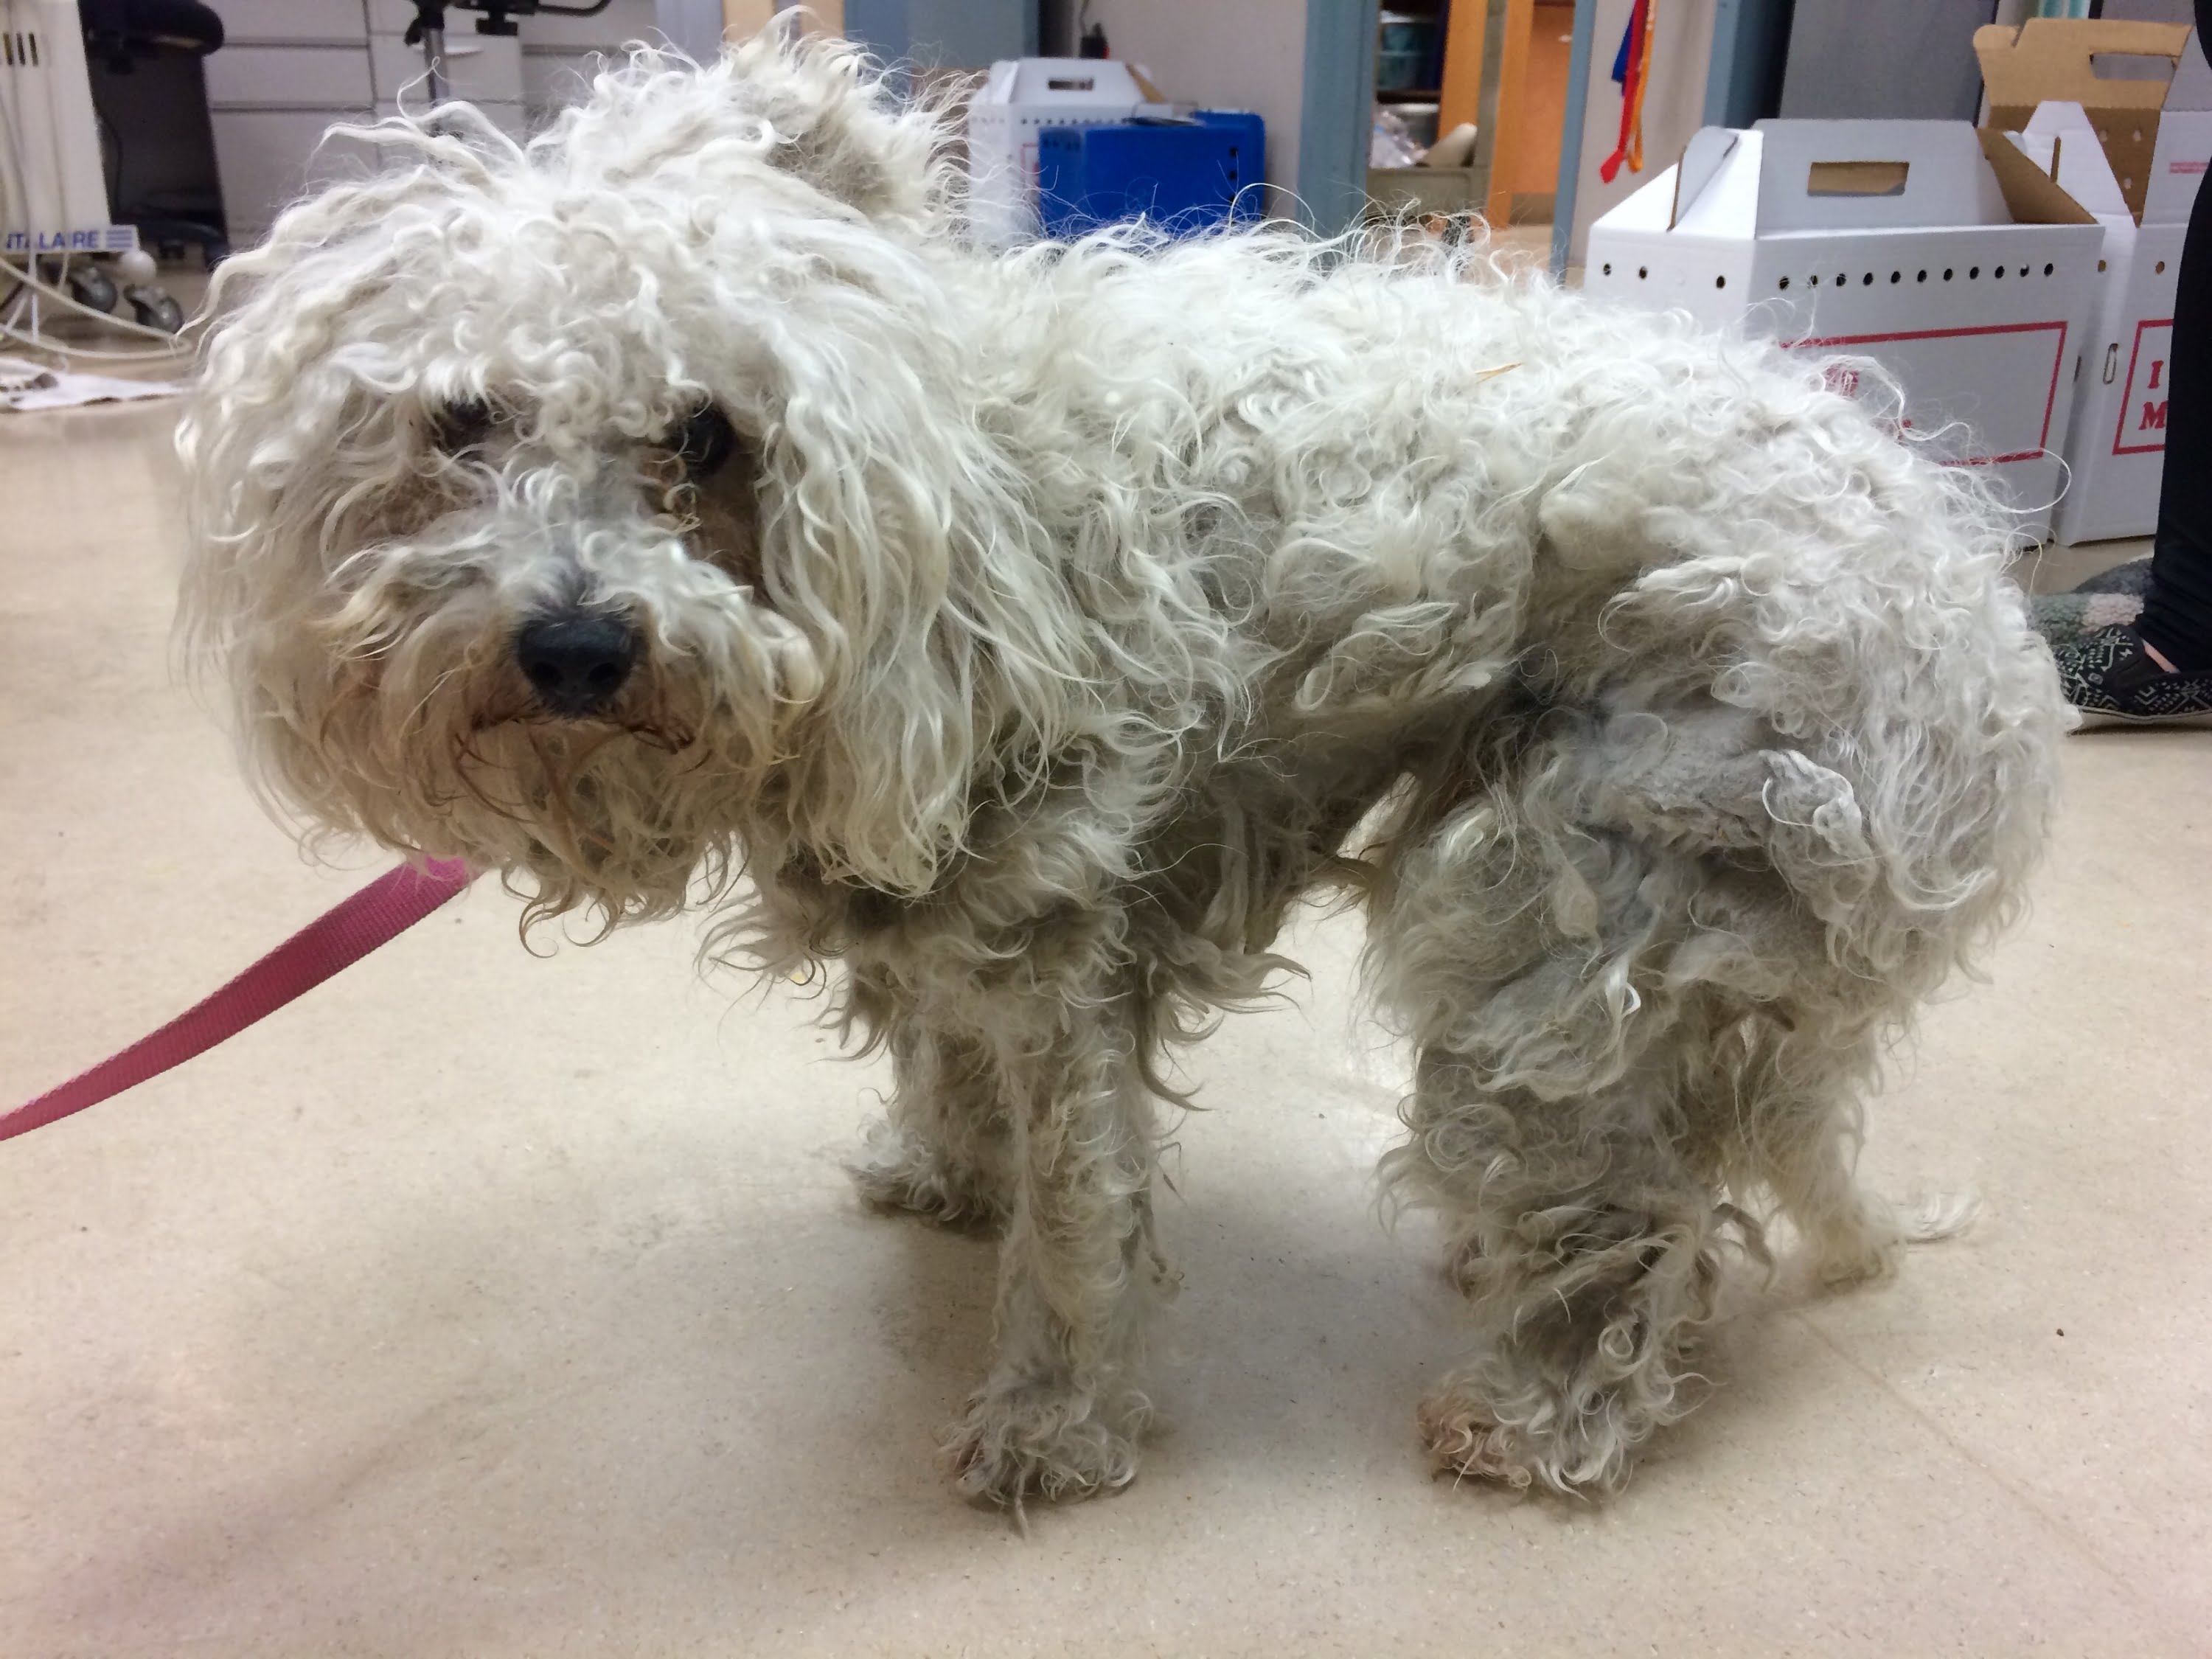 Snowy's Makeover: Matted Poodle Groomed by Shelter Staff - YouTube